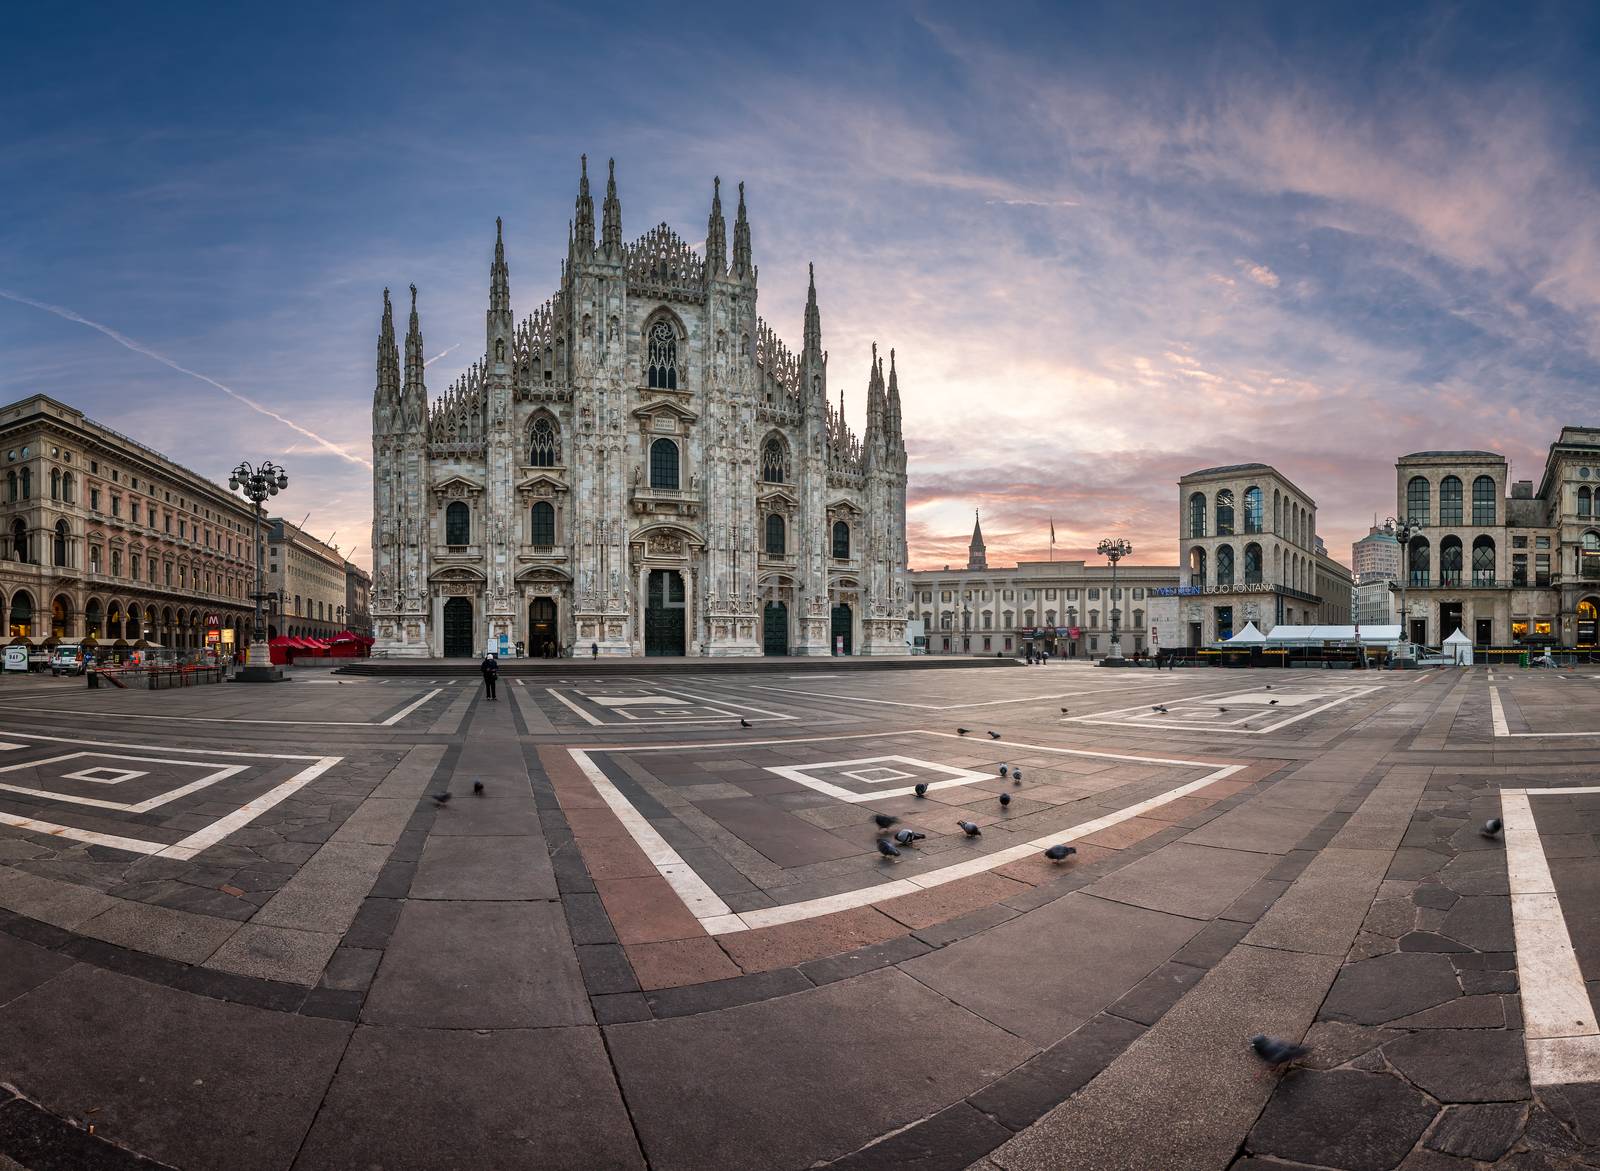 MILAN, ITALY - JANUARY 2, 2015: Milan Cathedral (Duomo di Milano) and Piazza del Duomo in Milan, Italy. Milan's Duomo is the second largest Catholic cathedral in the world.